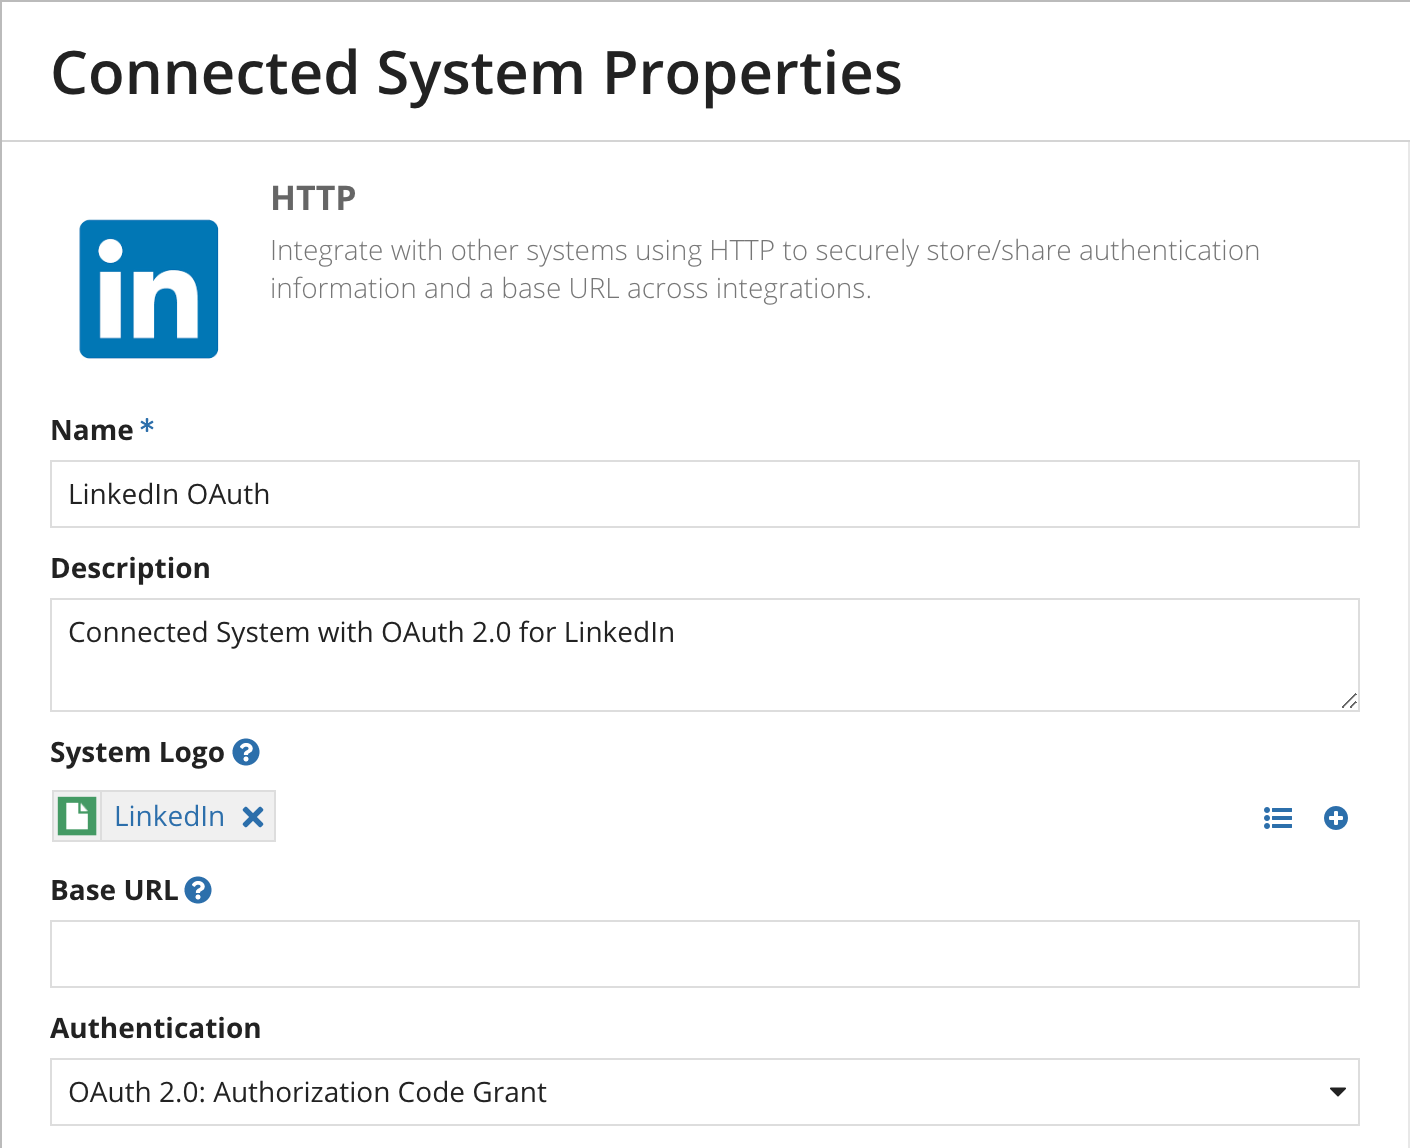 screenshot of an HTTP connected system configured with OAuth 2.0 authentication